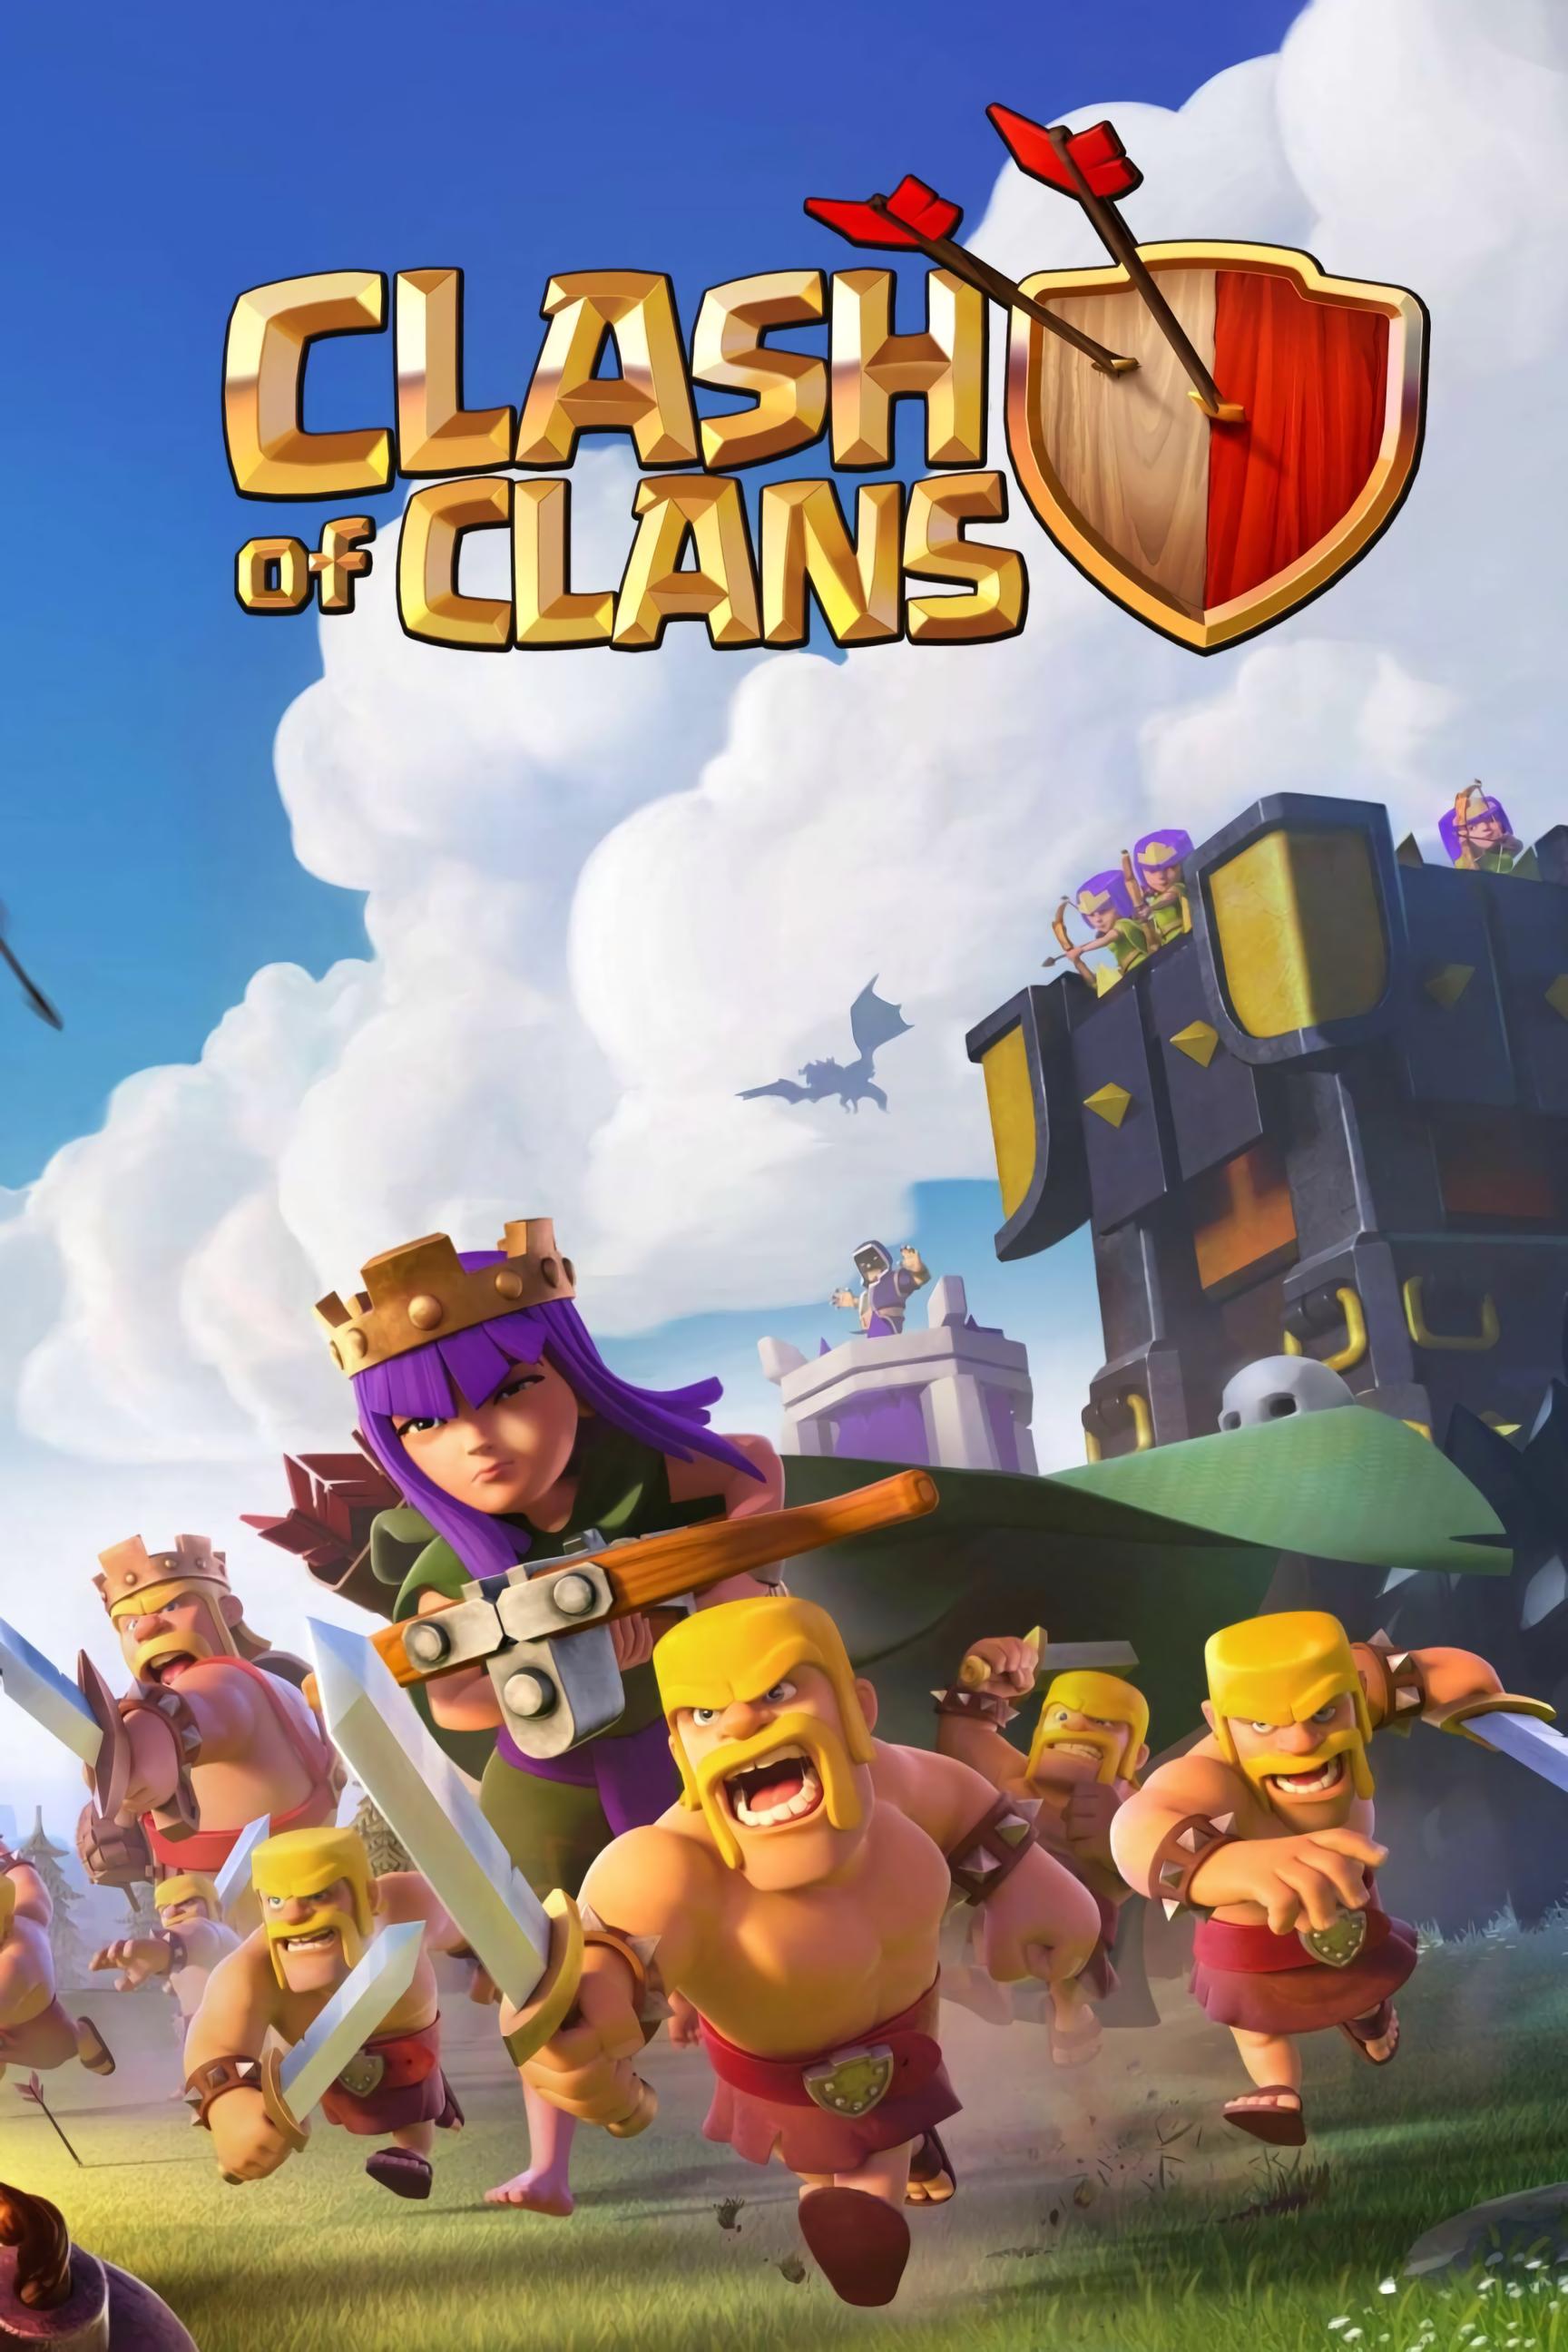 Game of clans